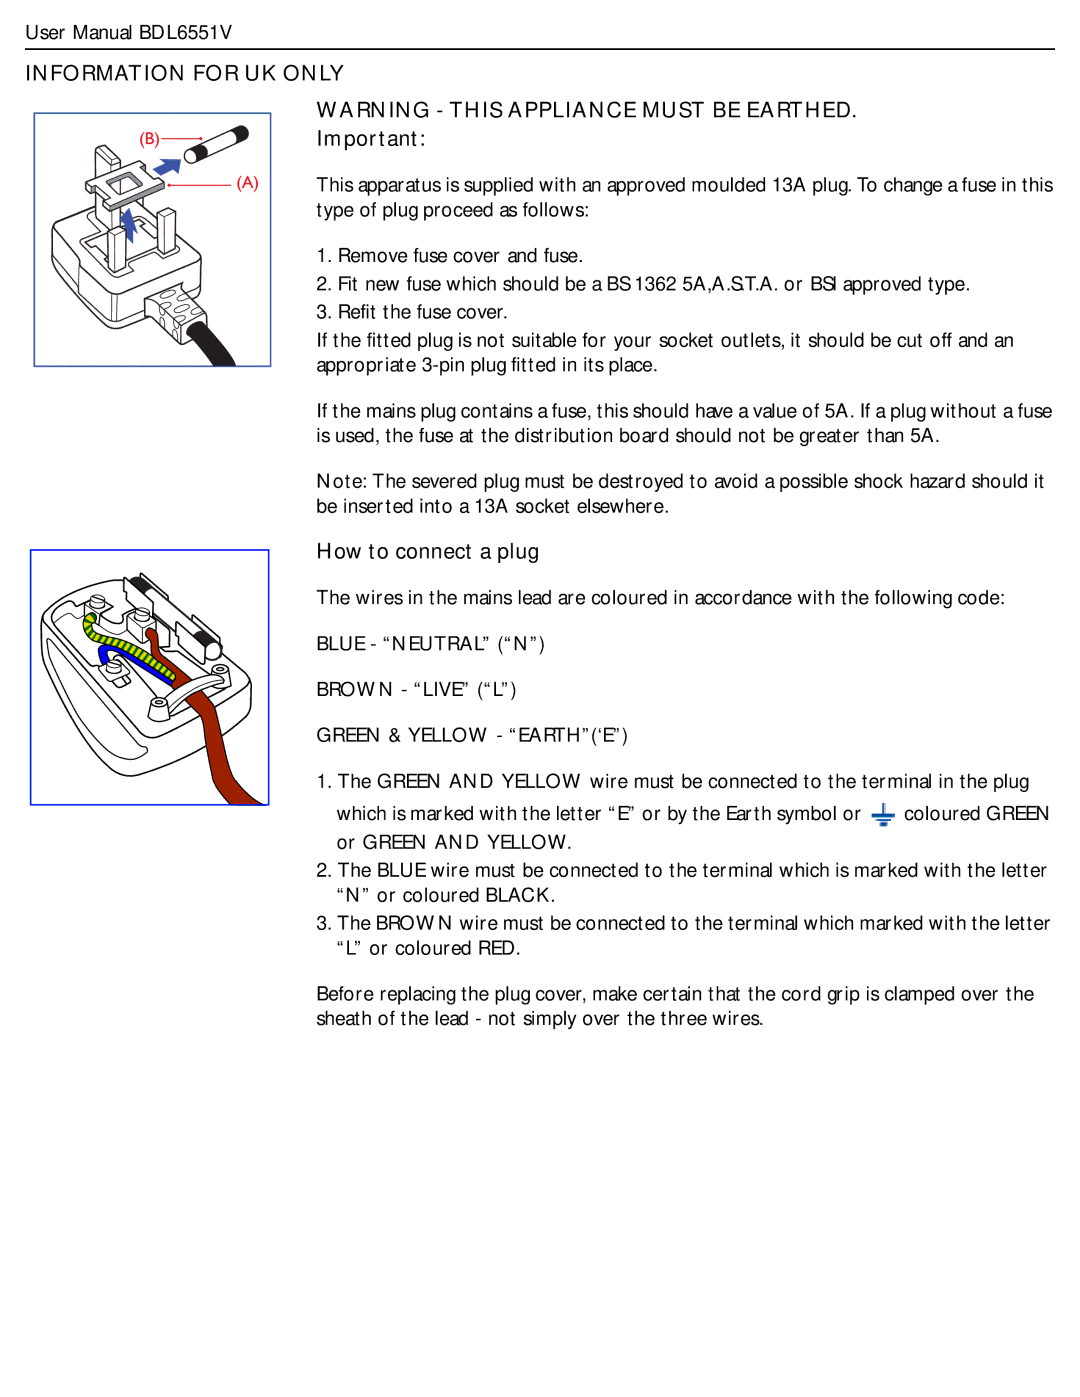 Philips BDL6551V user manual Information for UK only, How to connect a plug 